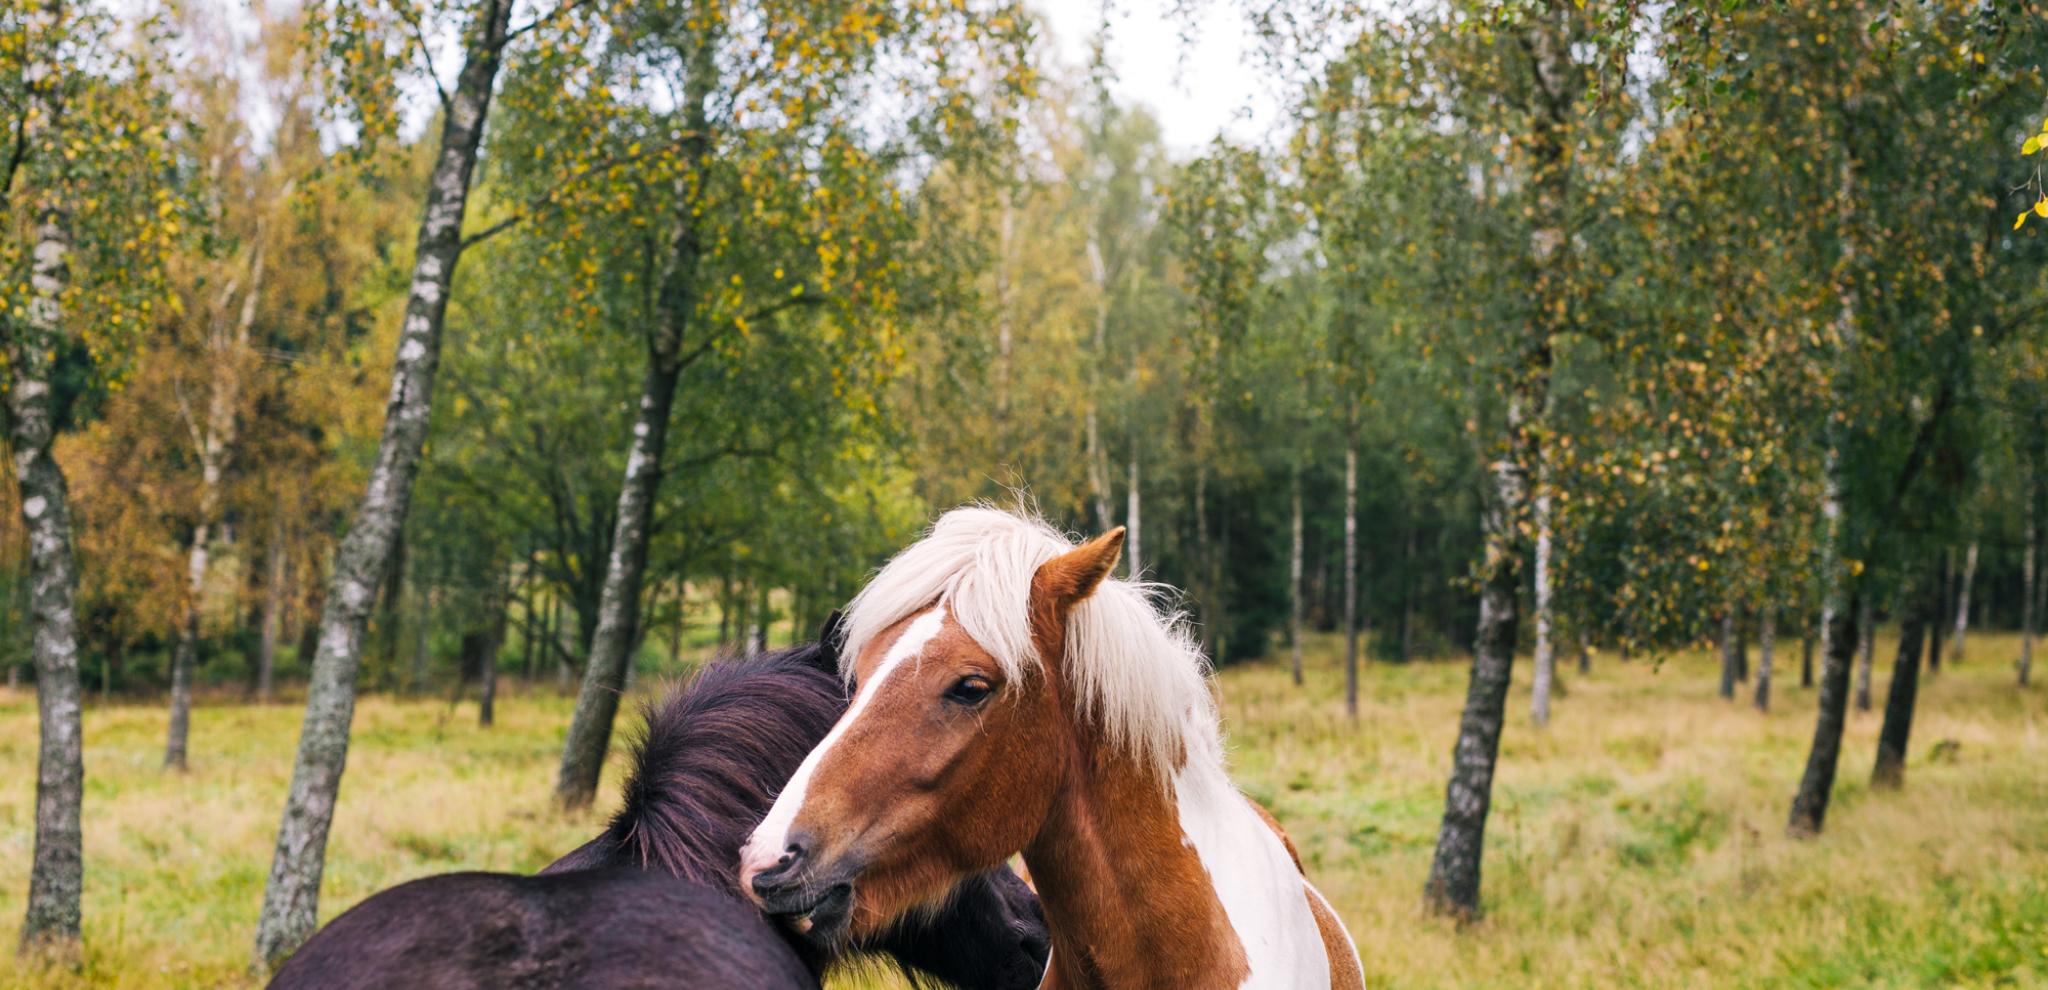 Two Horses hugging in a birch woodland